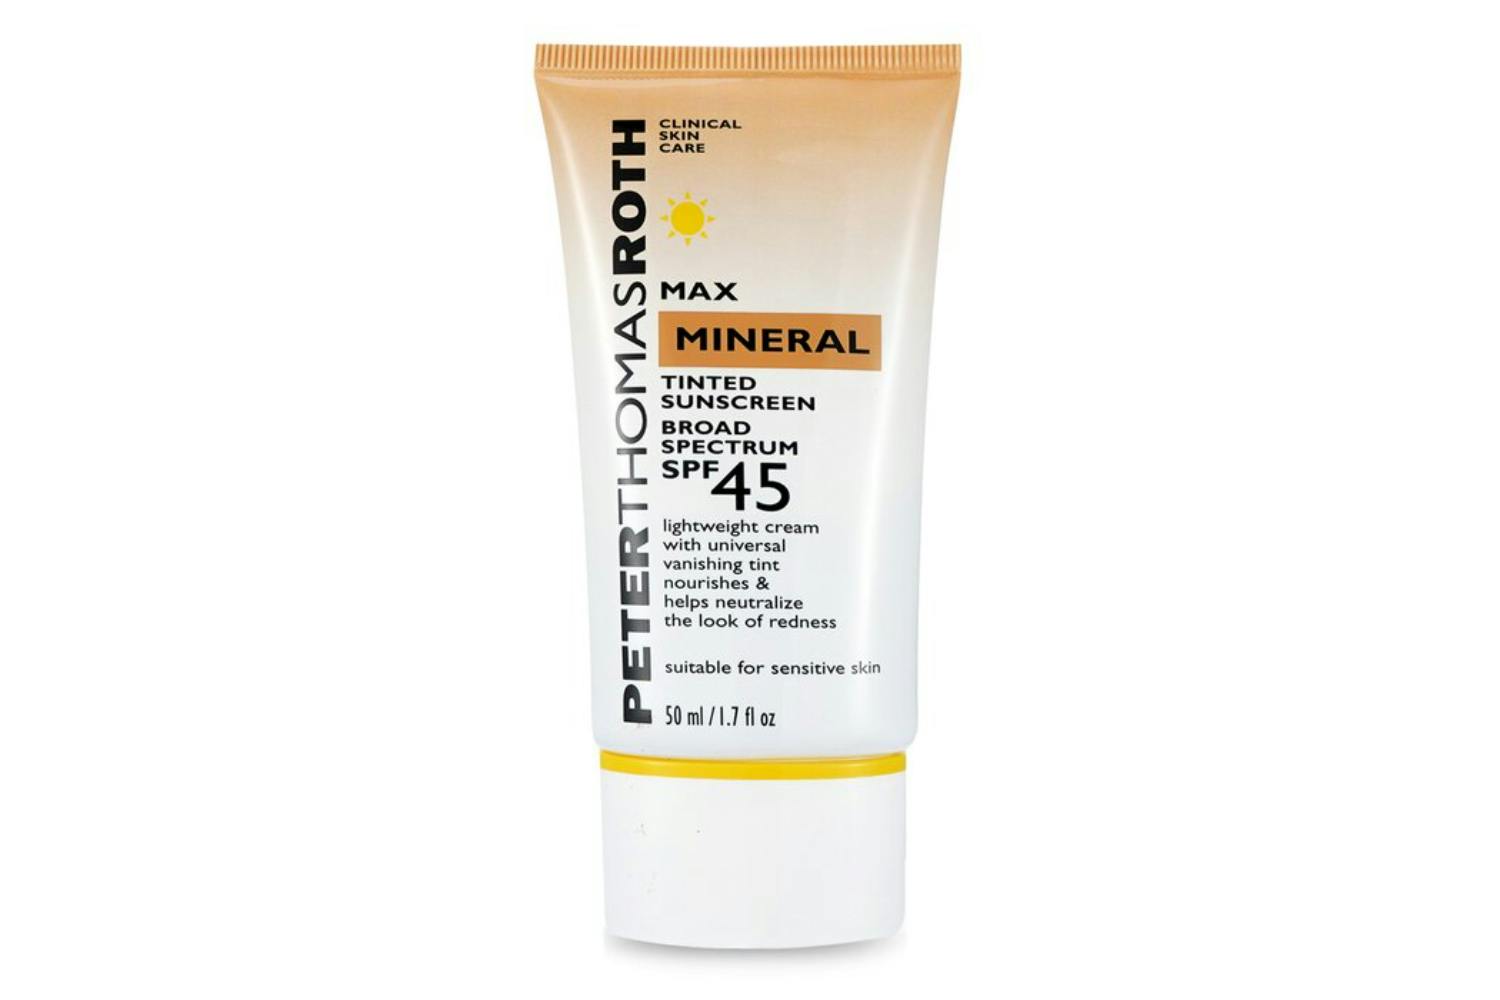 Peter Thomas Roth 269727 Max Mineral Tinted Sunscreen Broad Spectrum | 50ml